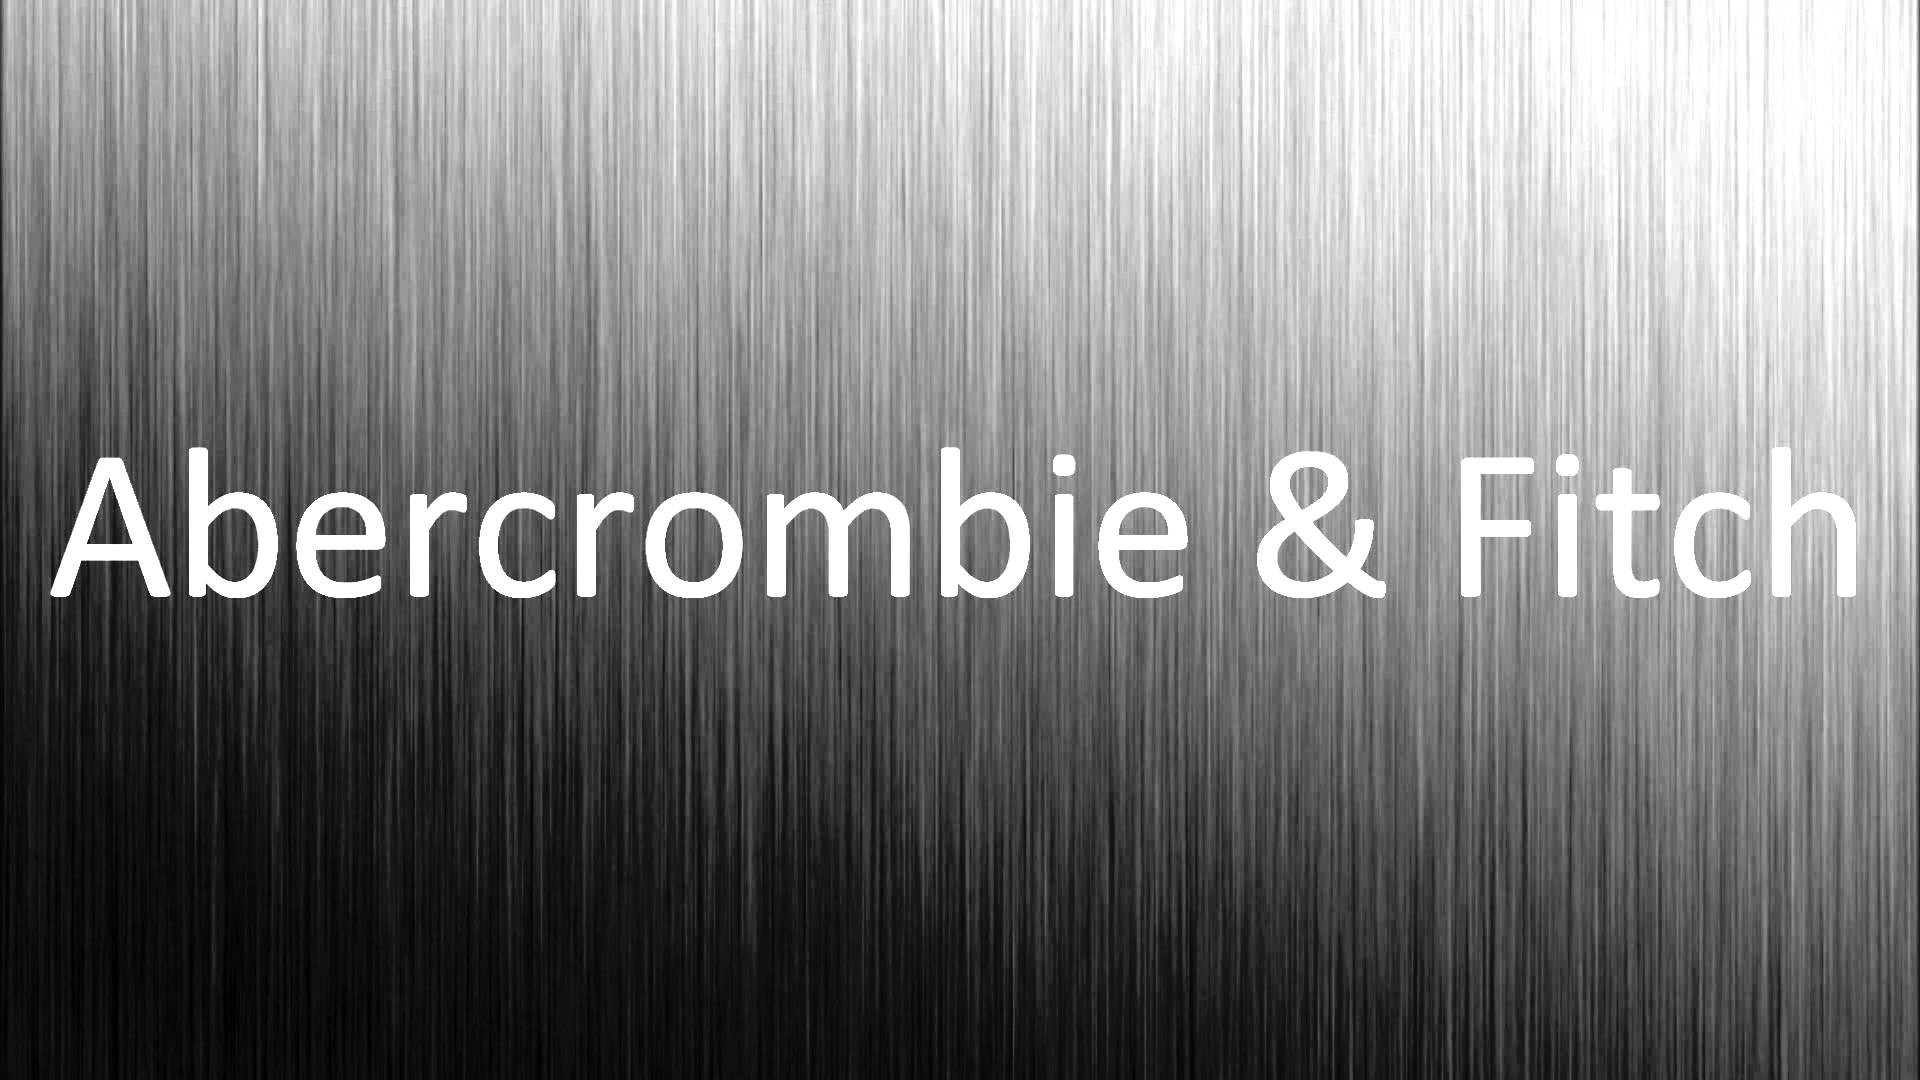 1920x1080 Abercrombie and Fitch images Abercrombie & Fitch HD wallpaper and .